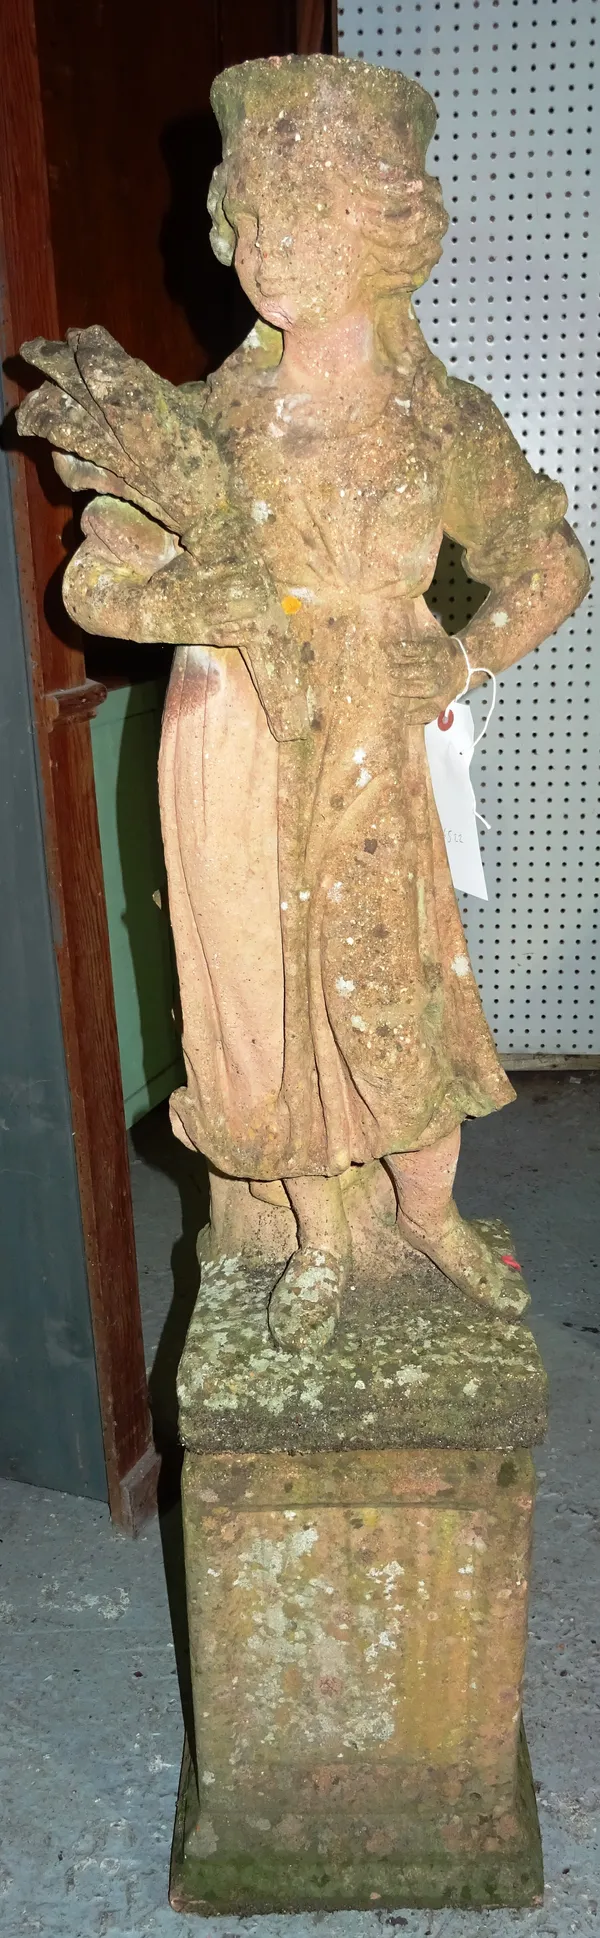 A 20th century reconstituted stone figure carrying corn on plinth base, 115cm high. K6